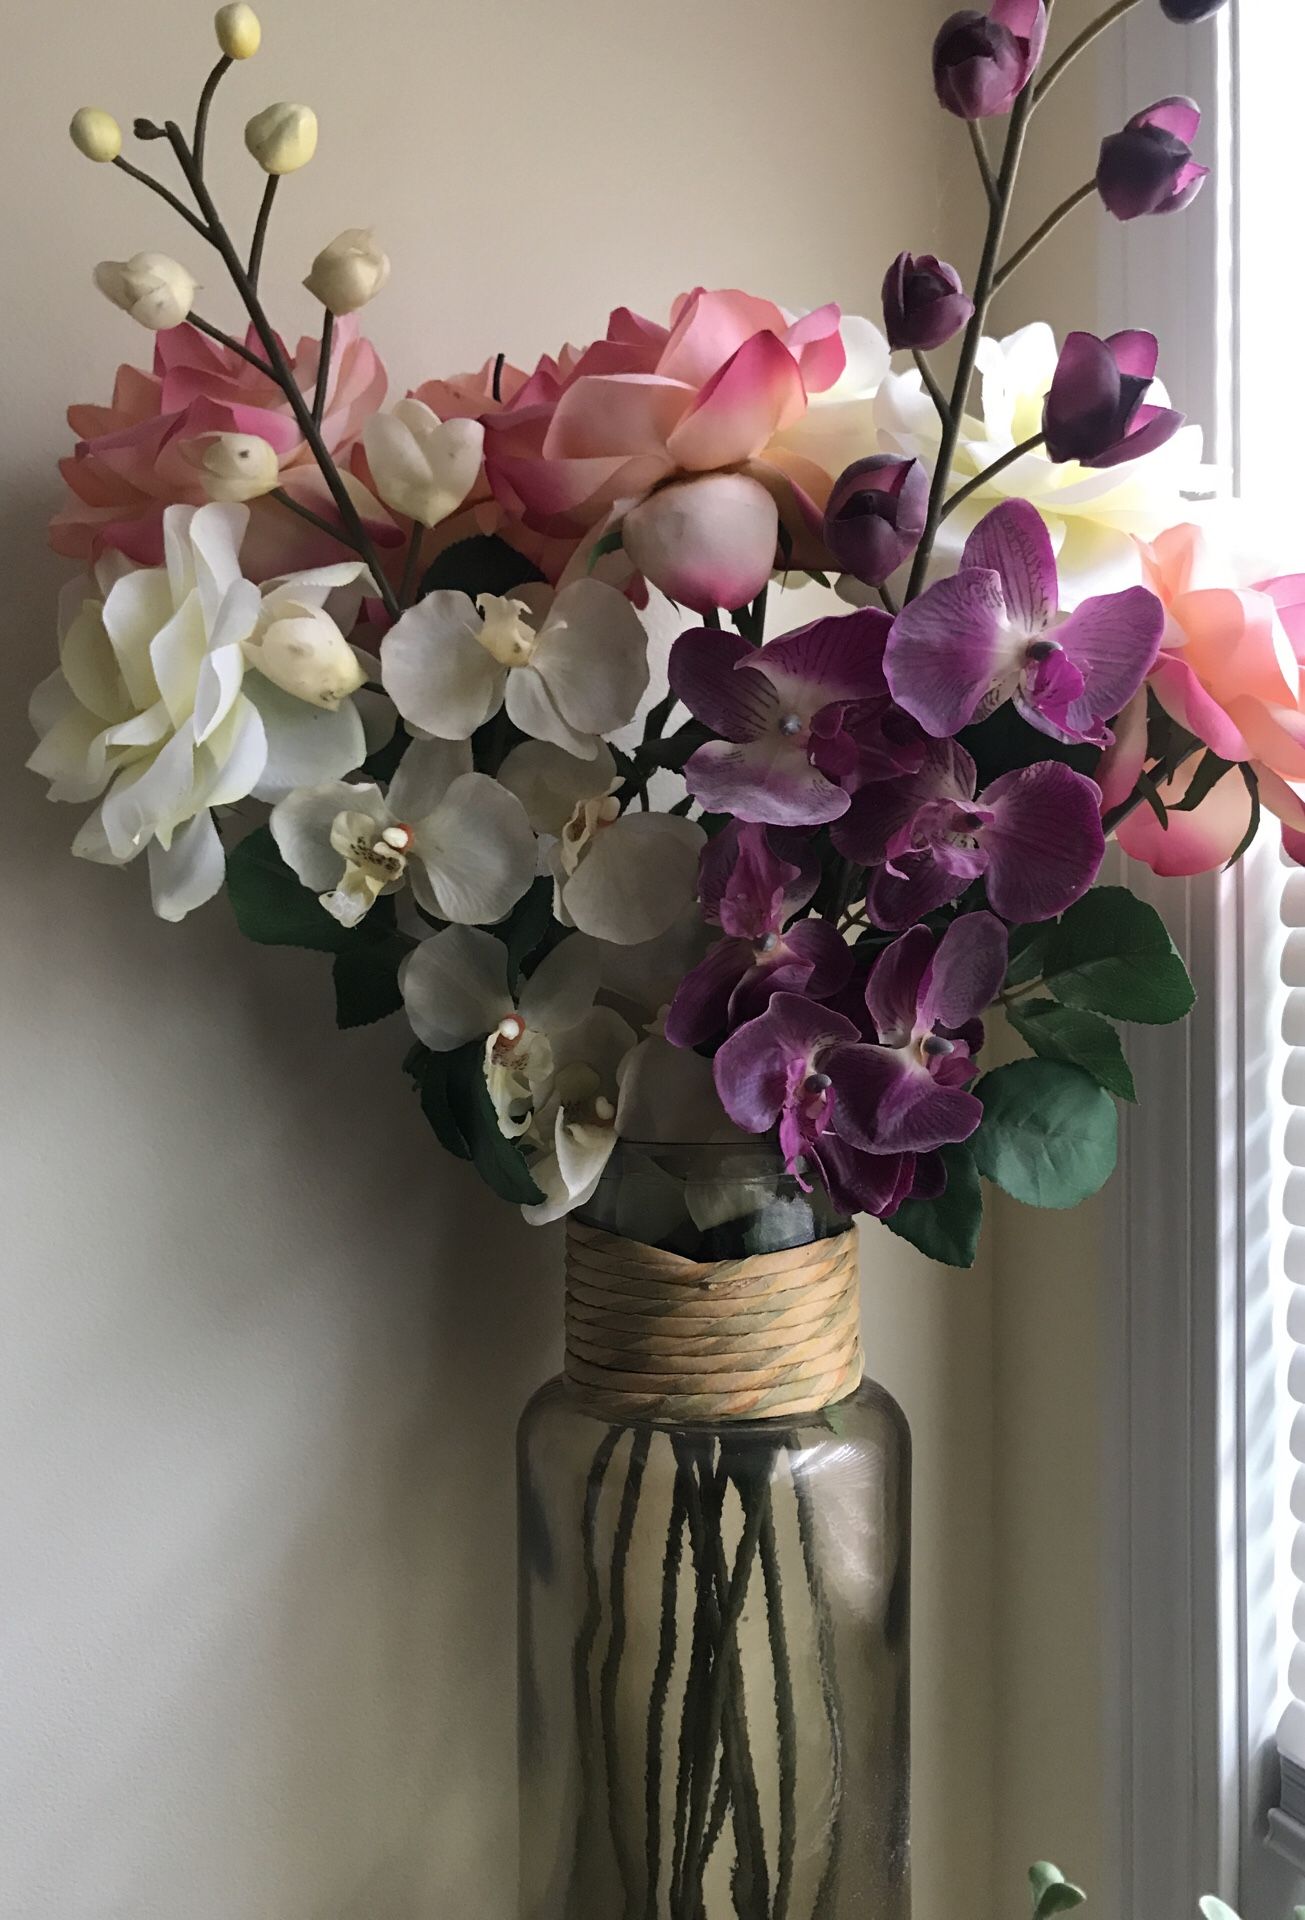 Decorative floral vase and flowers